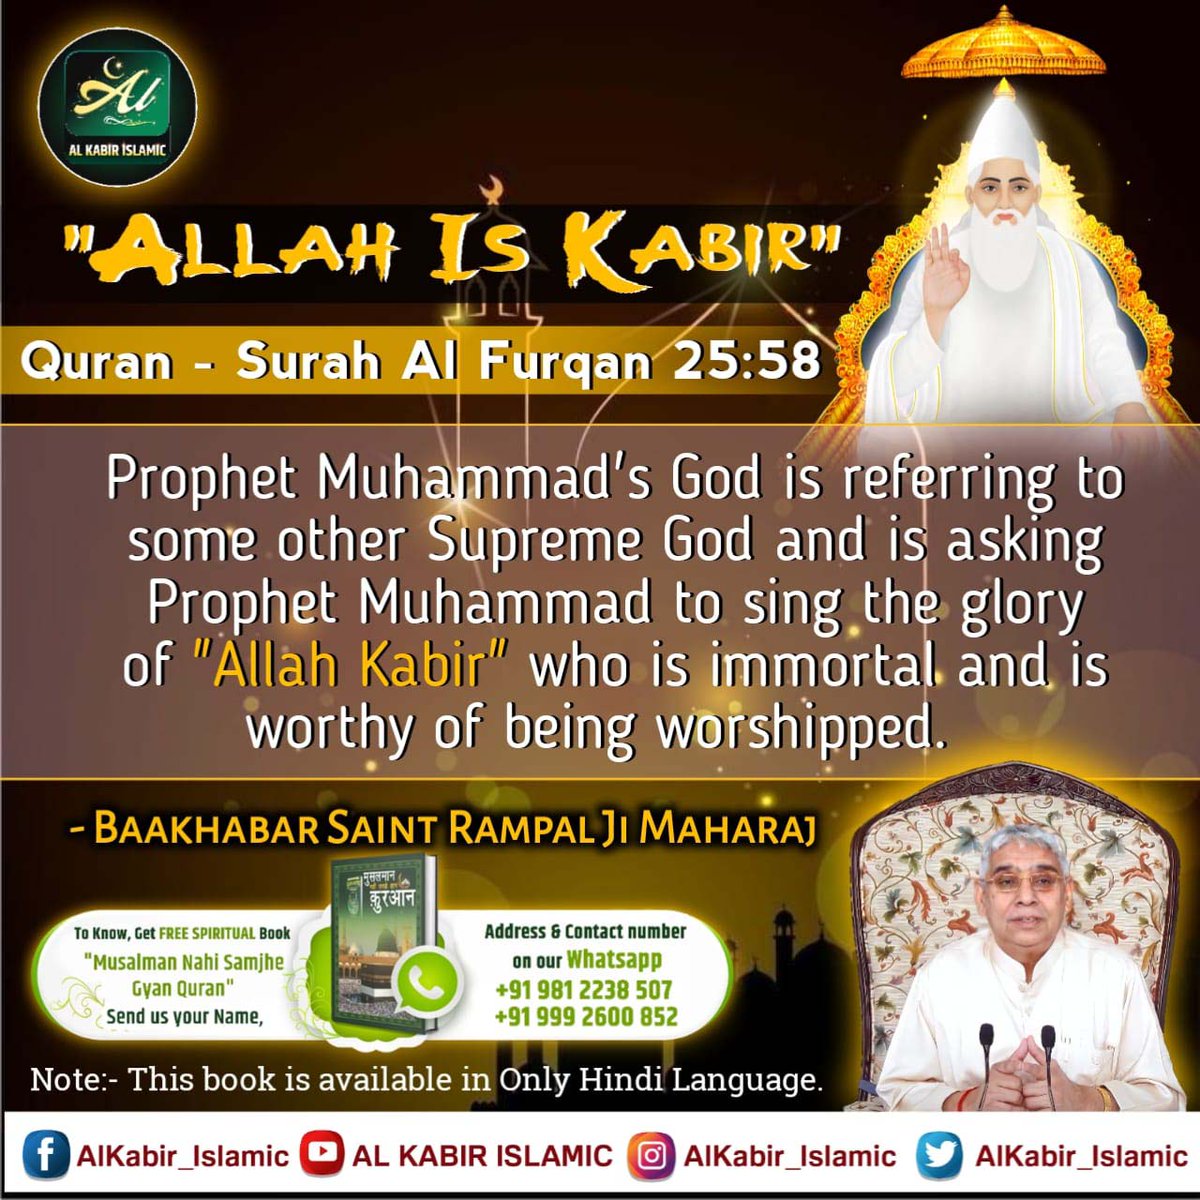 #GodmorningWednesday

God (Allah) in Islam As Per the Holy Quran Sharif The inherent knowledge of Quran Sharif in Islam has been missed out on by the proponents of Islam.#wednesdaythought